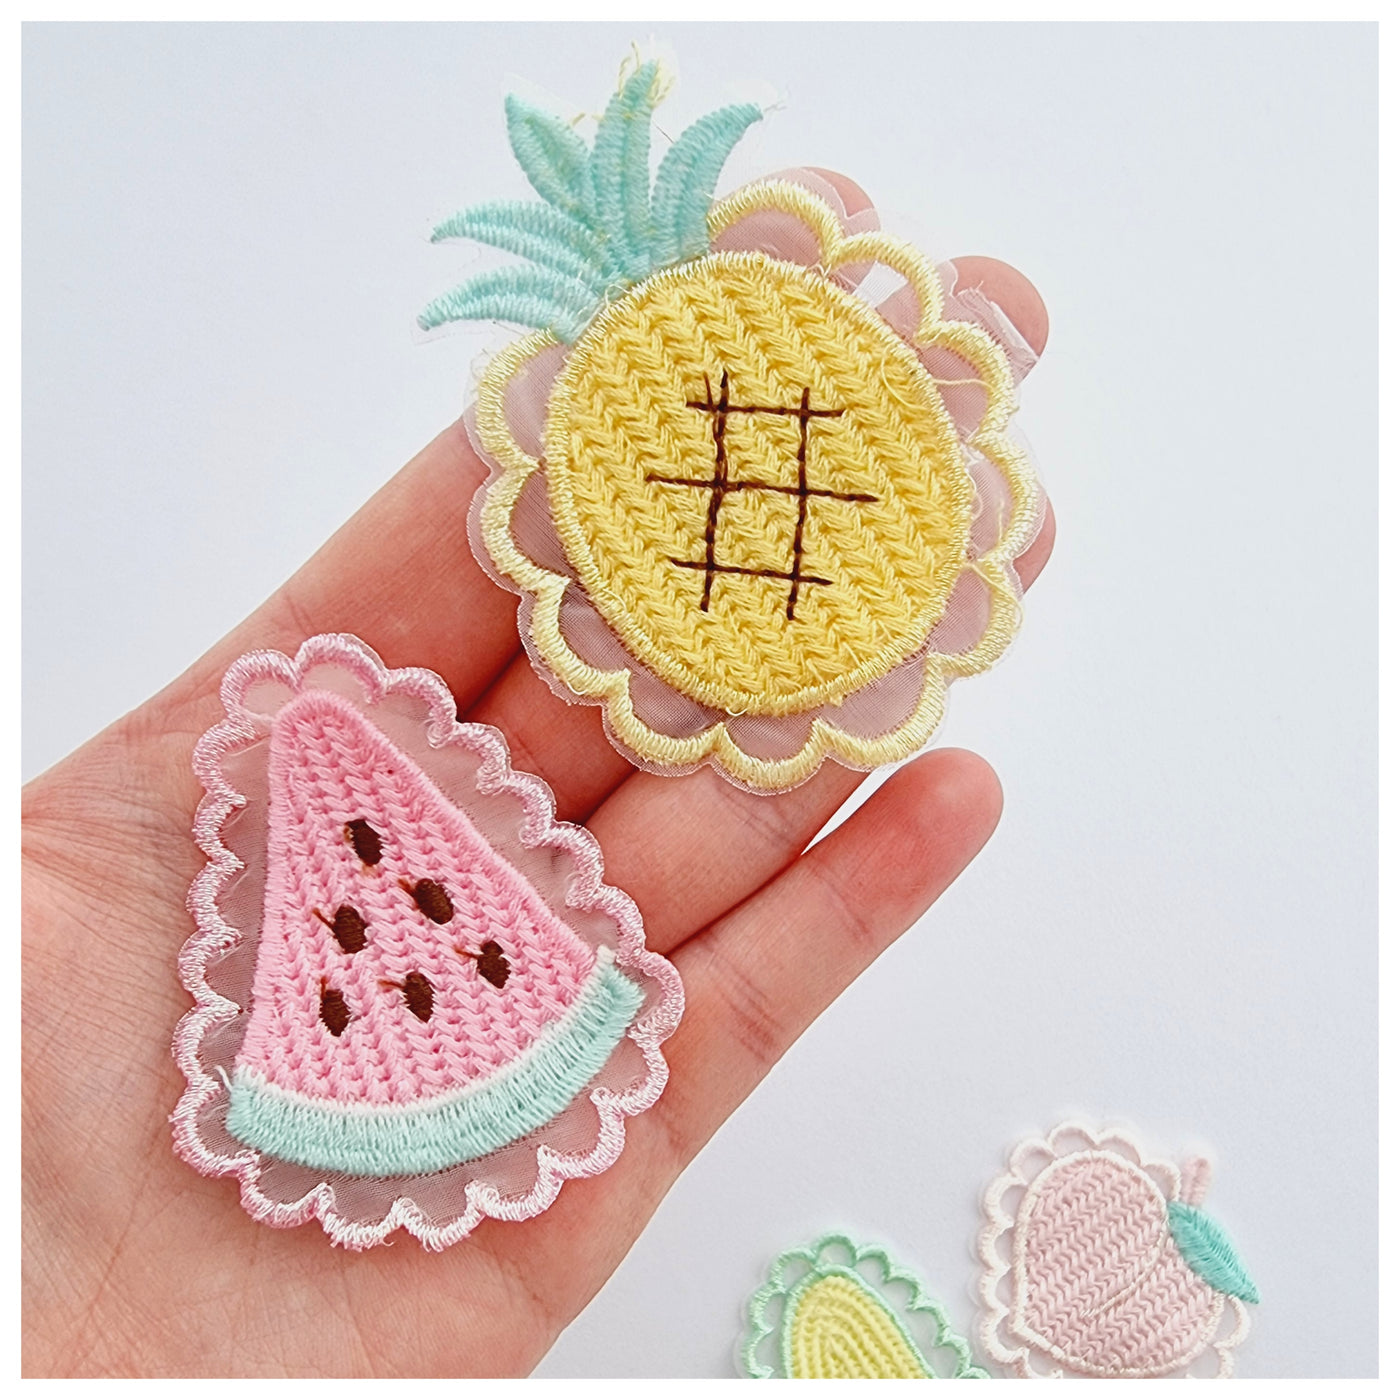 1 x Embroided Fruit Applique (4 options)